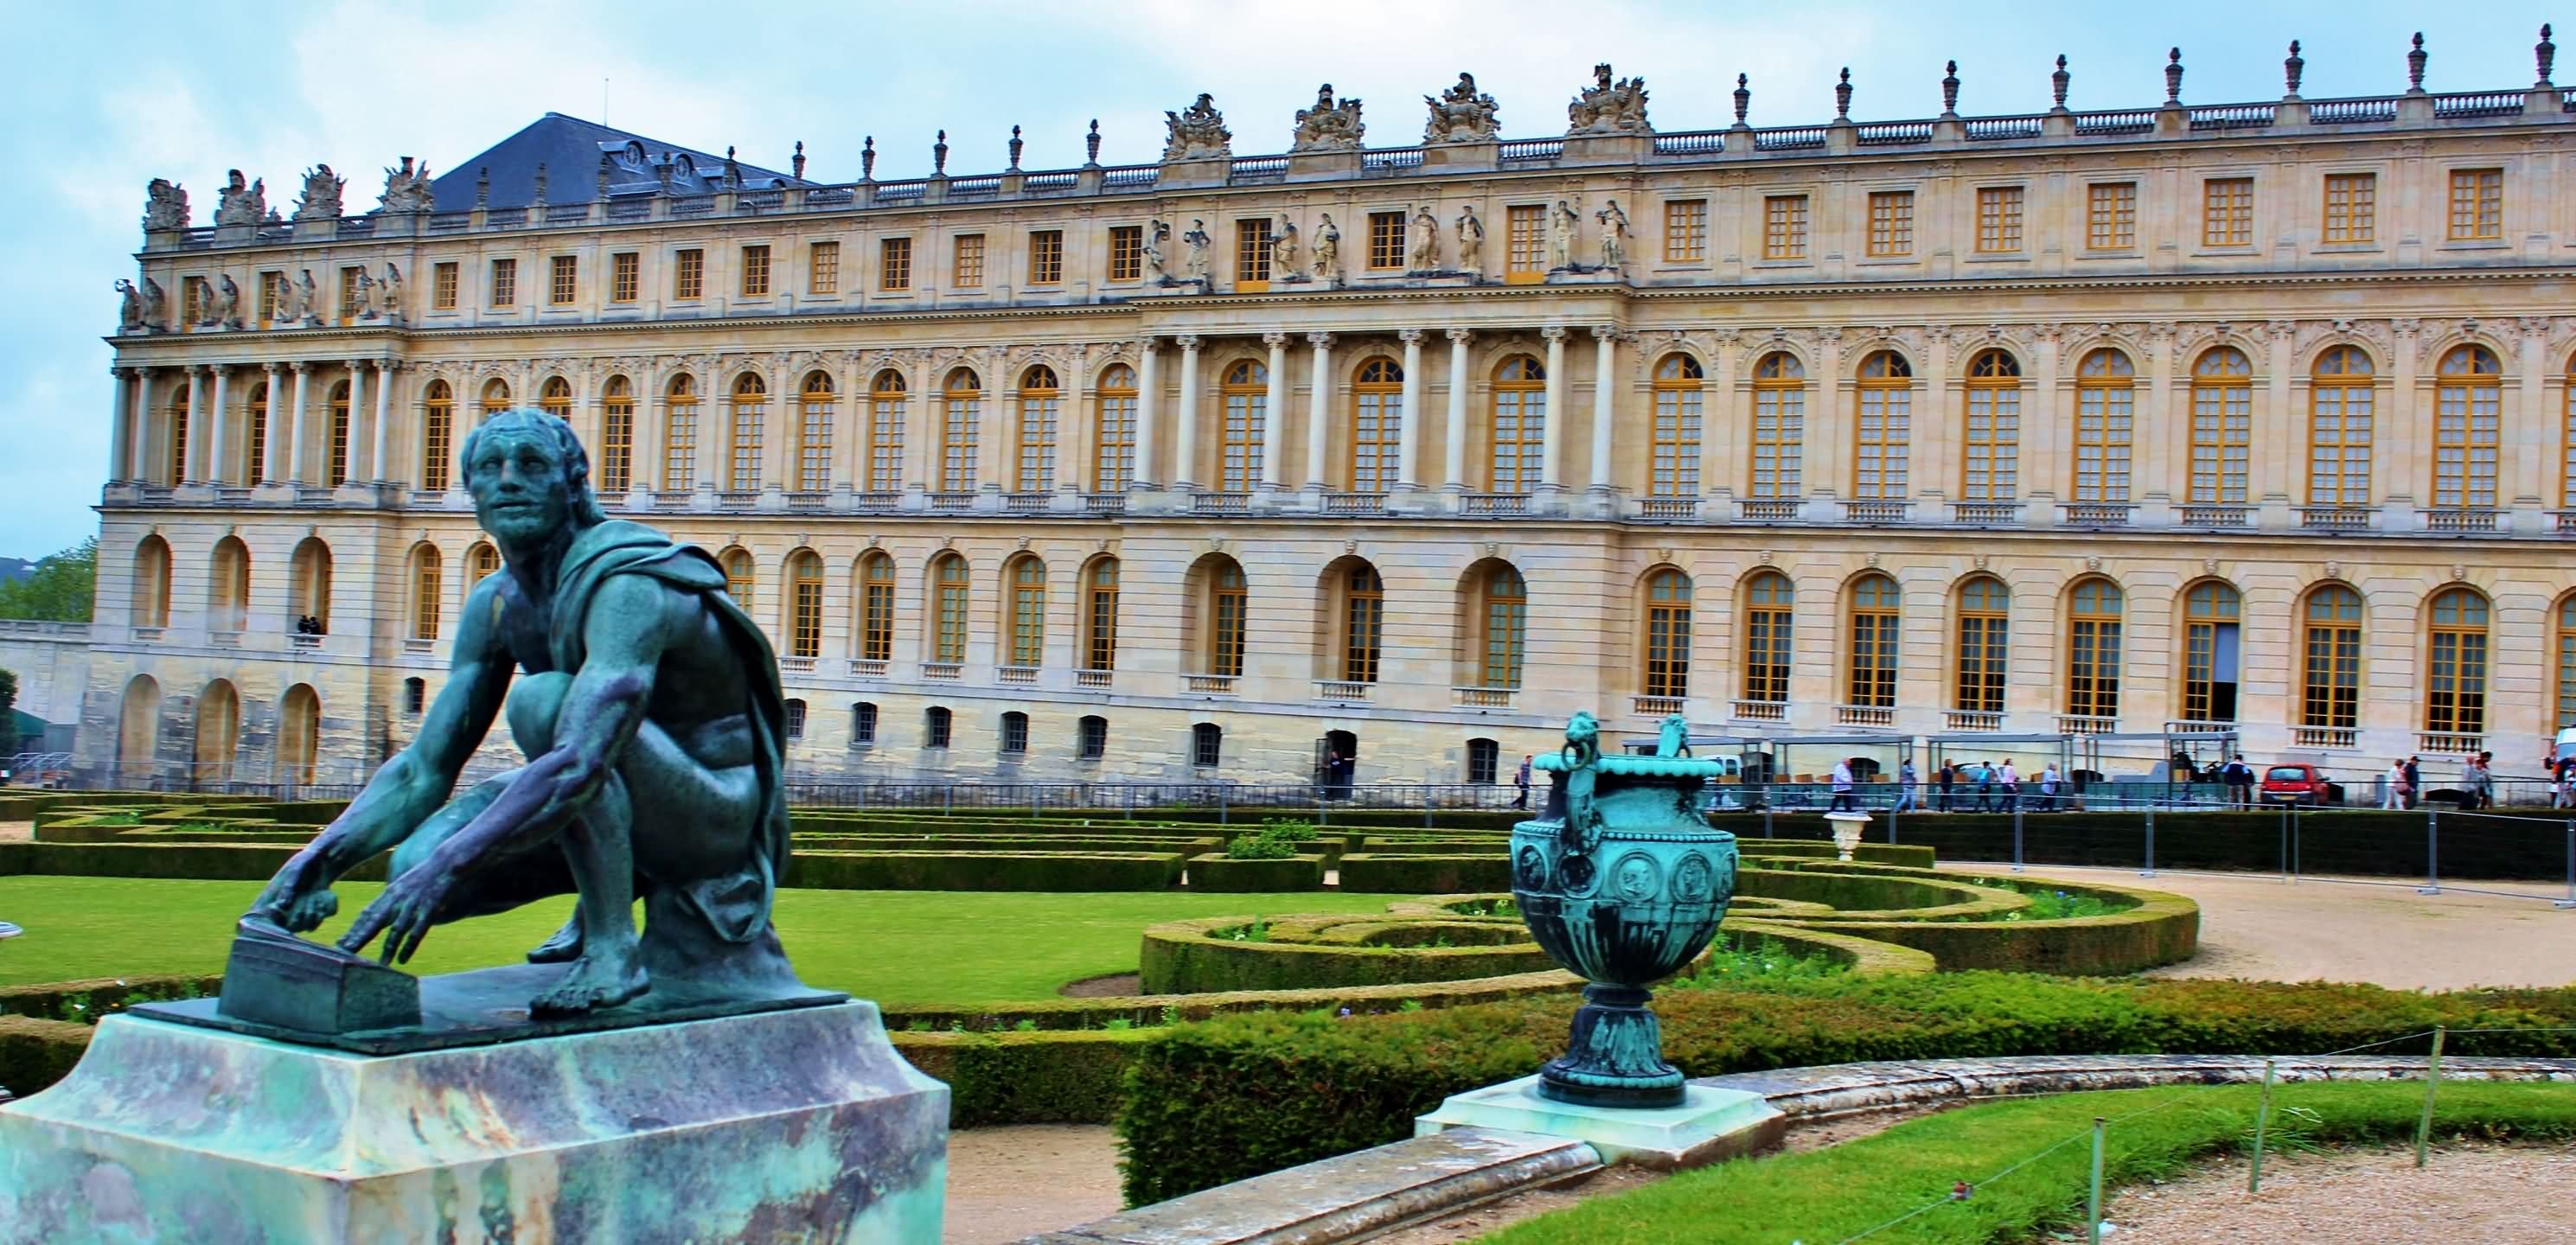 Bronze Statue And The Palace of Versailles